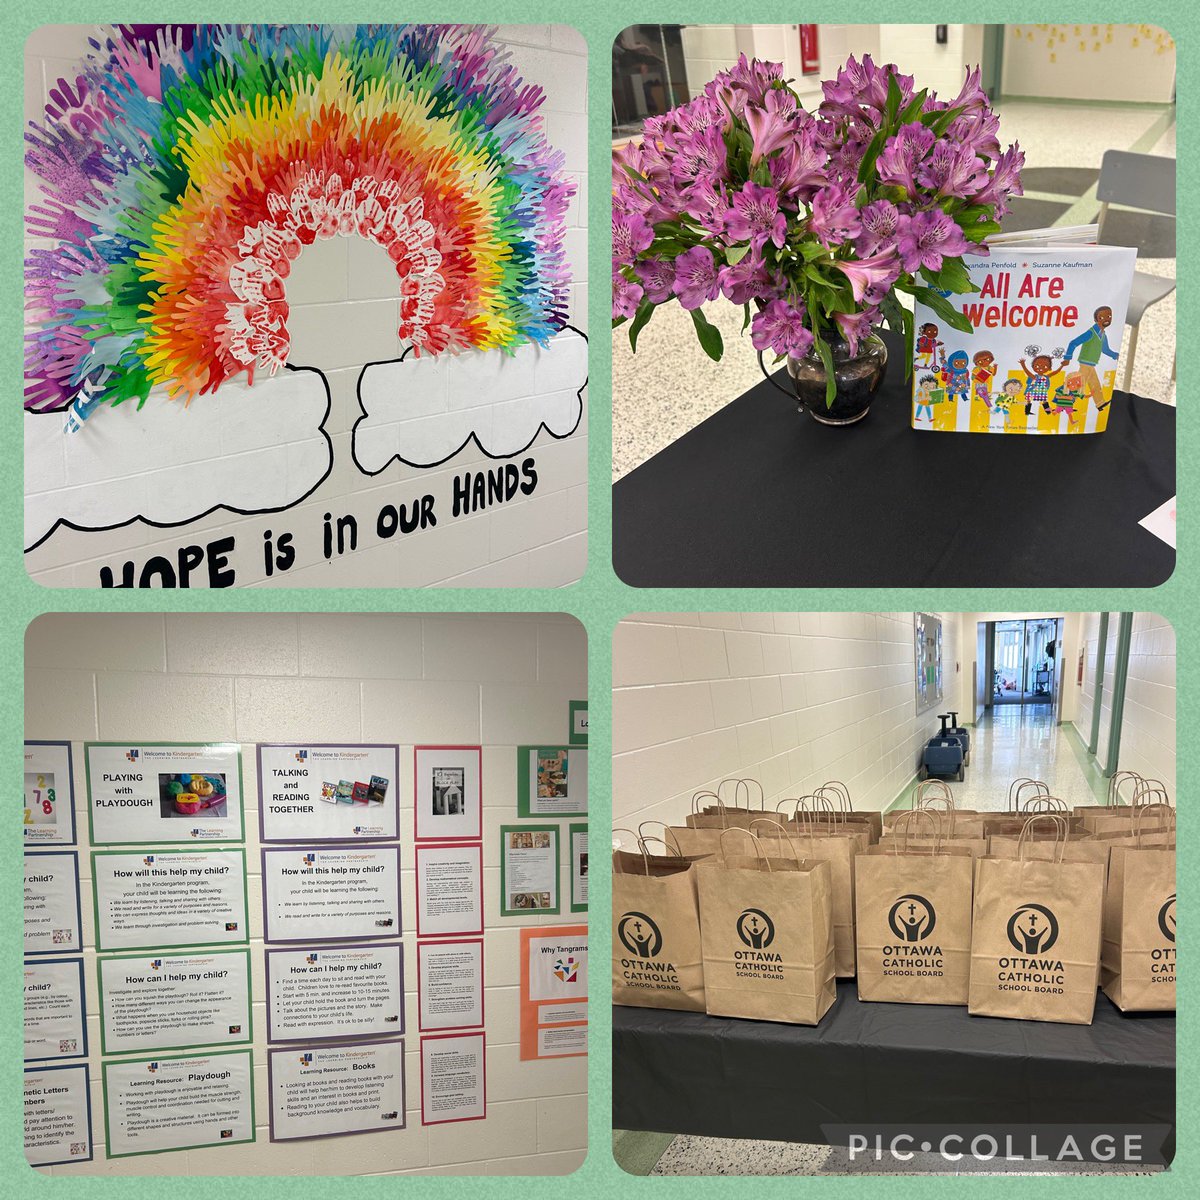 Thank you to all the amazing families that came to our Welcome to Kindergarten evening. We are excited to welcome new Bulls to the herd! #ocsbKindergarten